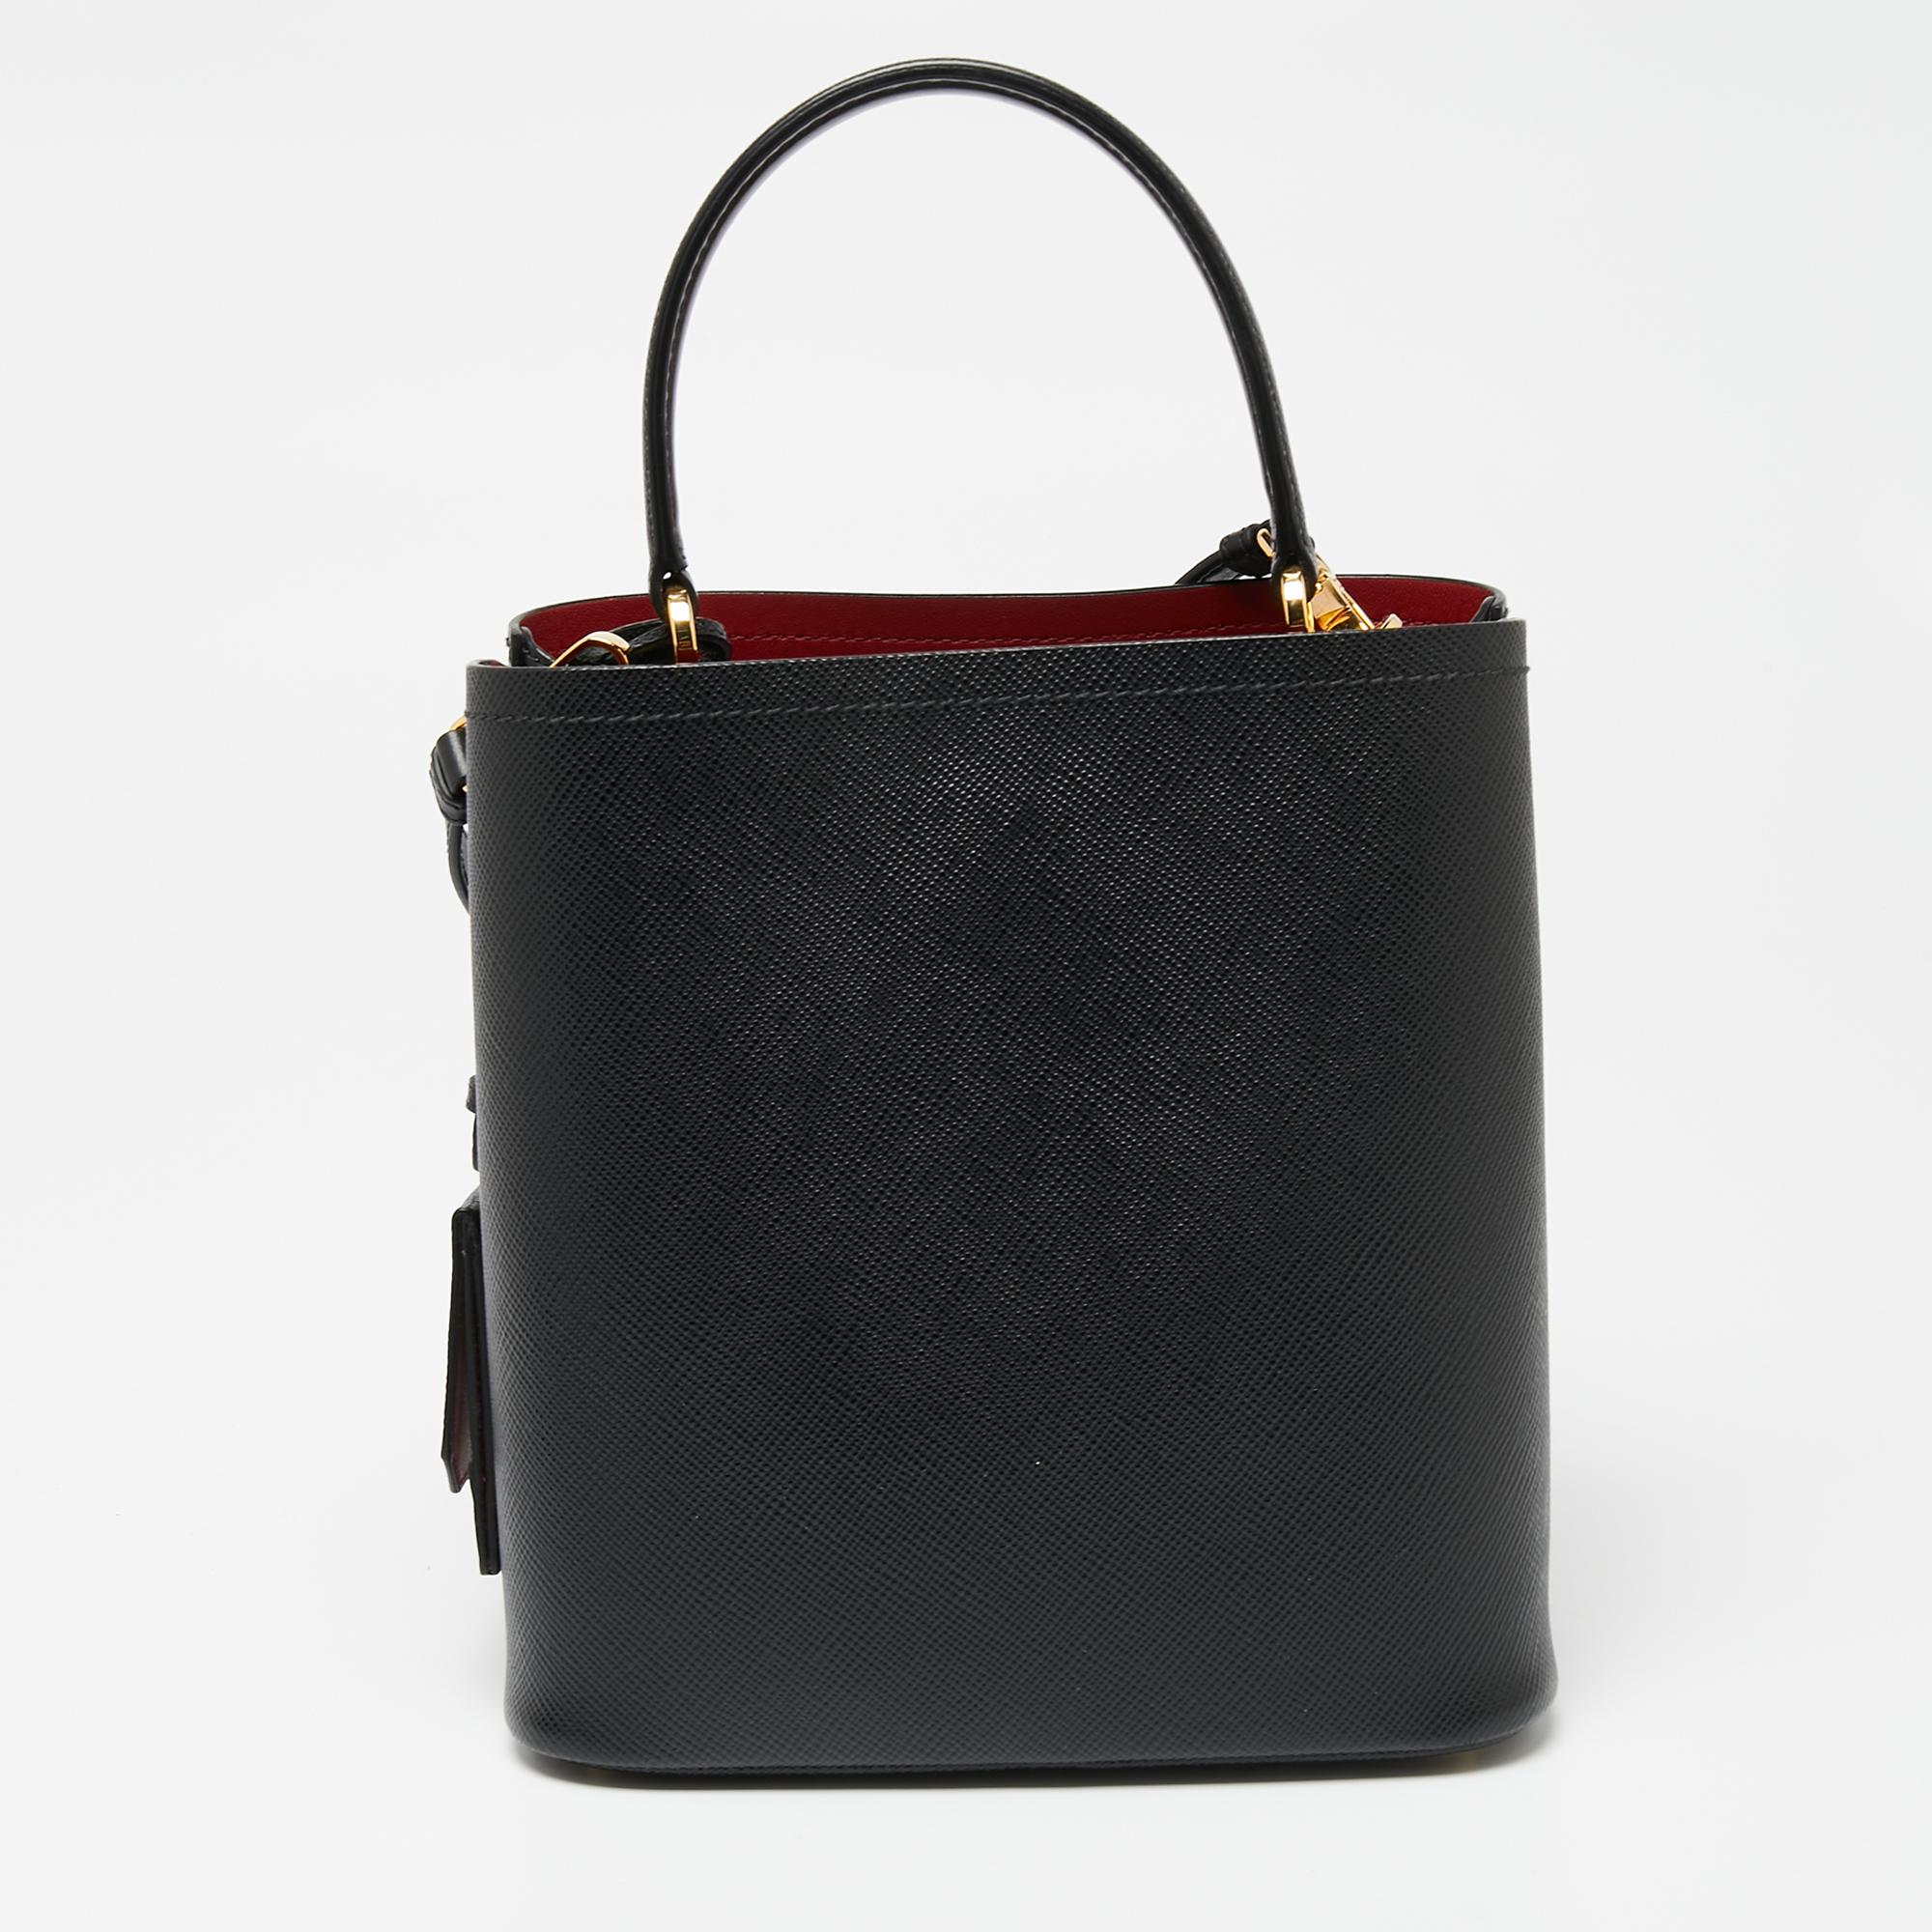 Distinctive in design and style, this Panier bag from Prada definitely deserves to be yours! It has been crafted from black leather and features a single top handle and the brand logo on the front. It opens to a spacious interior that can easily